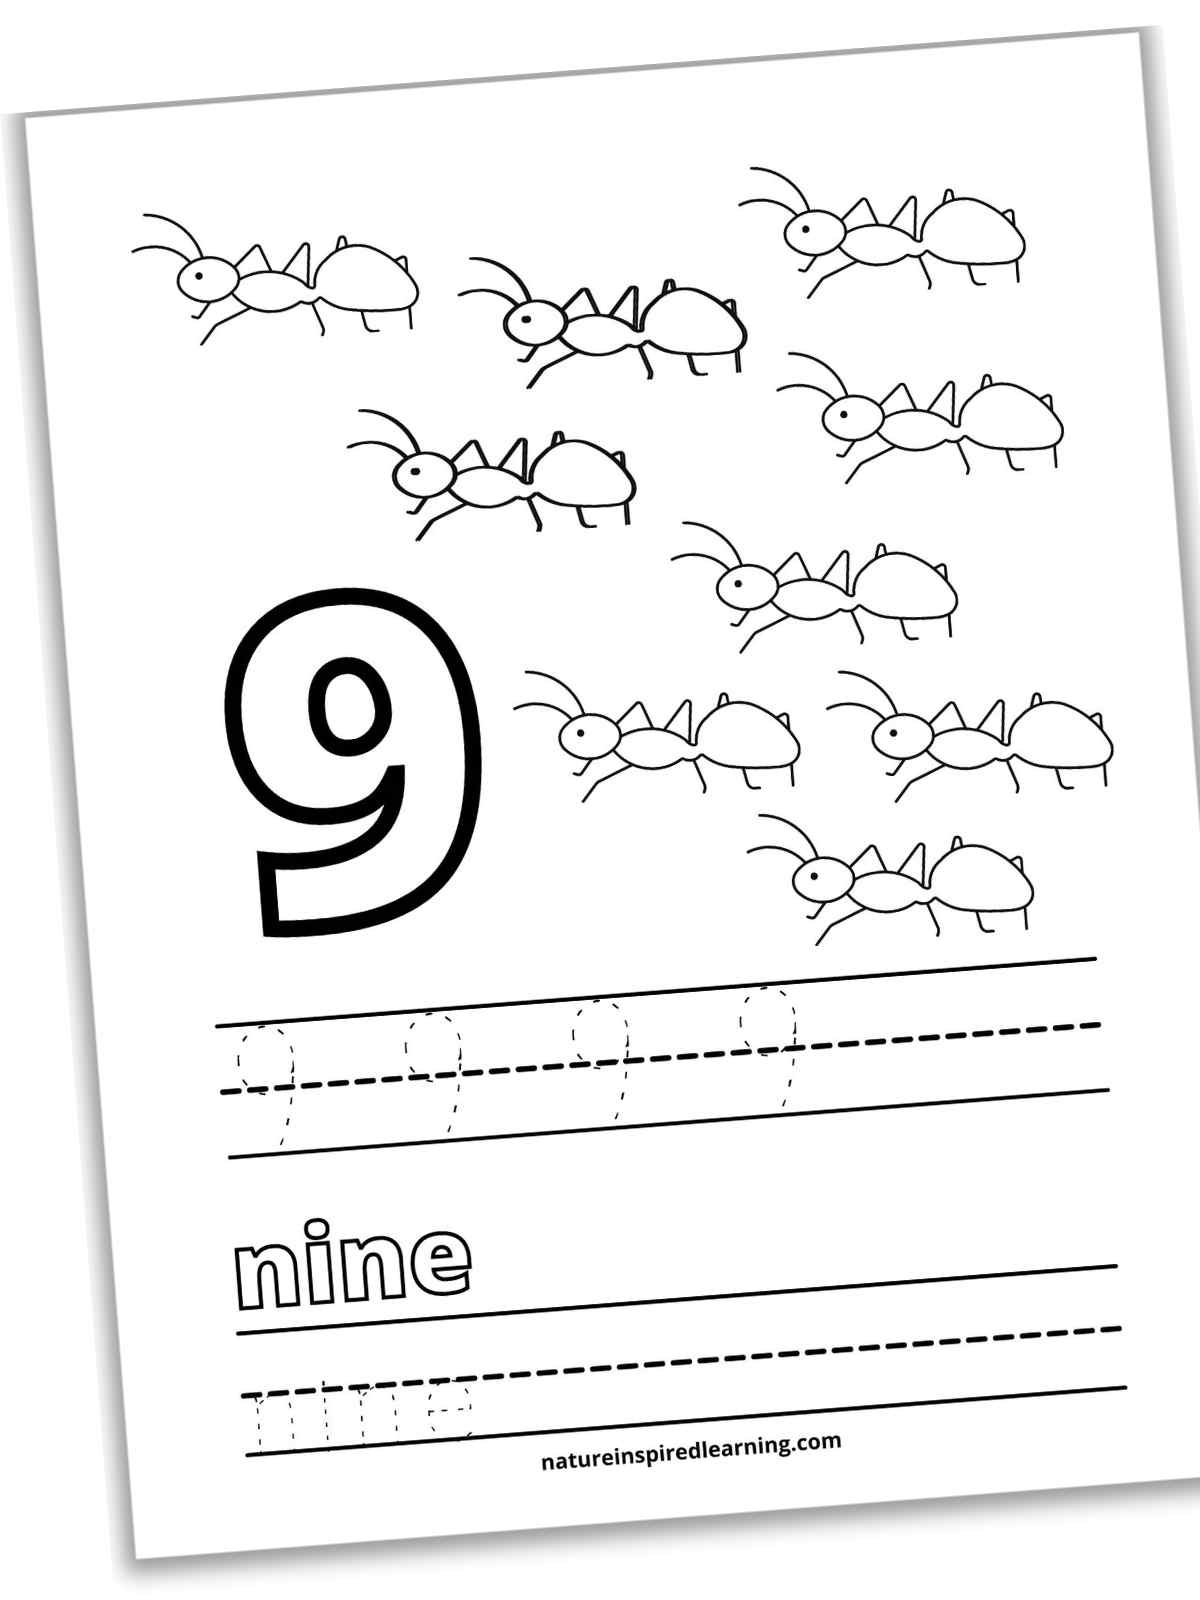 slanted black and white printable with large outline of number 9, nine ants, 9's in traceable font on lines, nine in outline form above lines with nine in traceable font